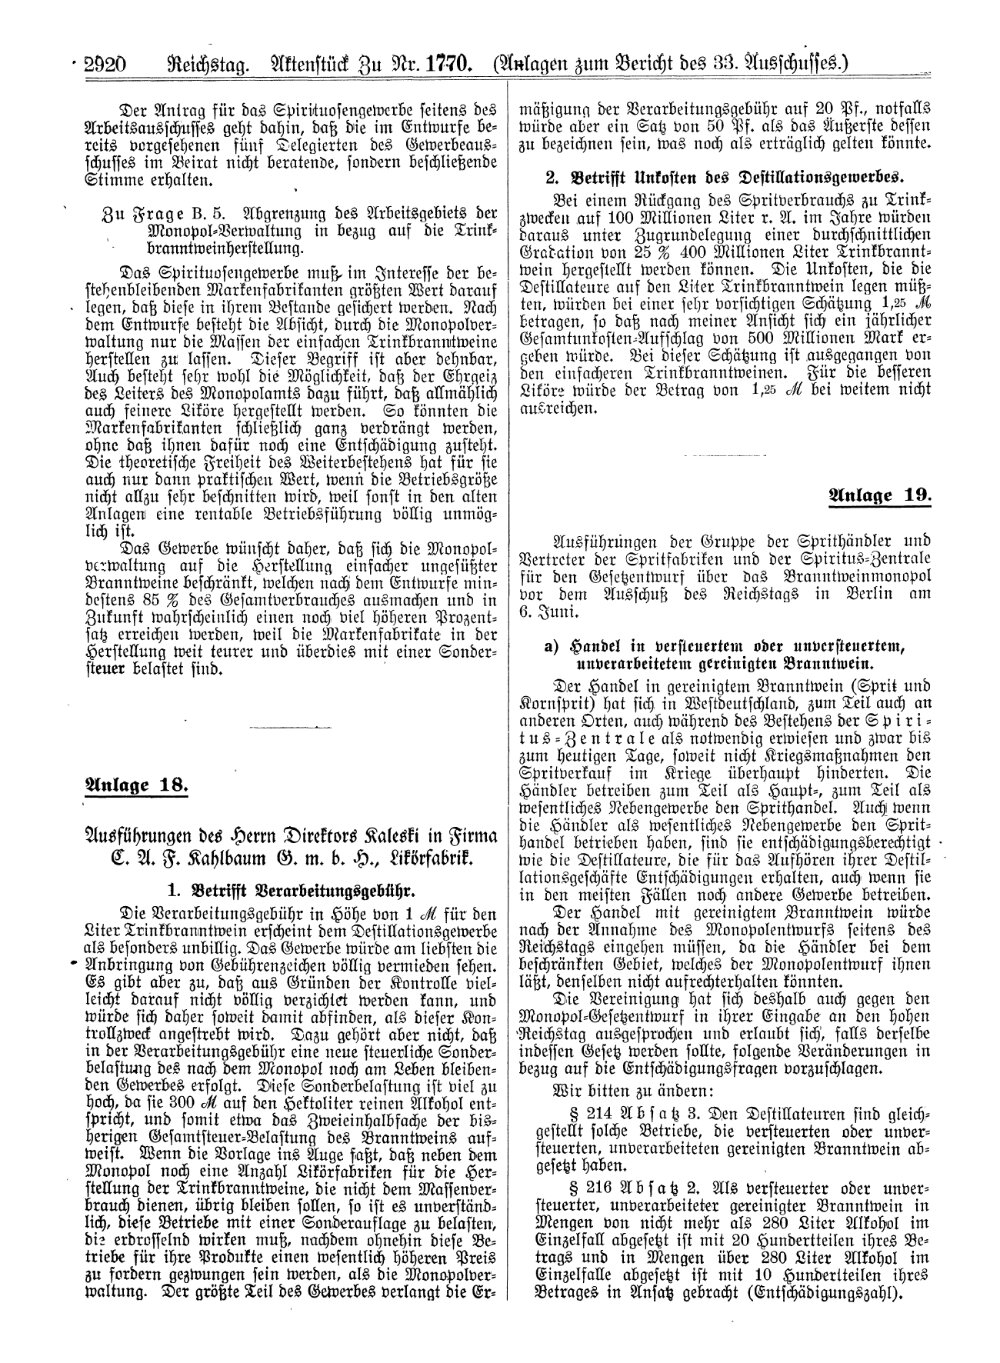 Scan of page 2920